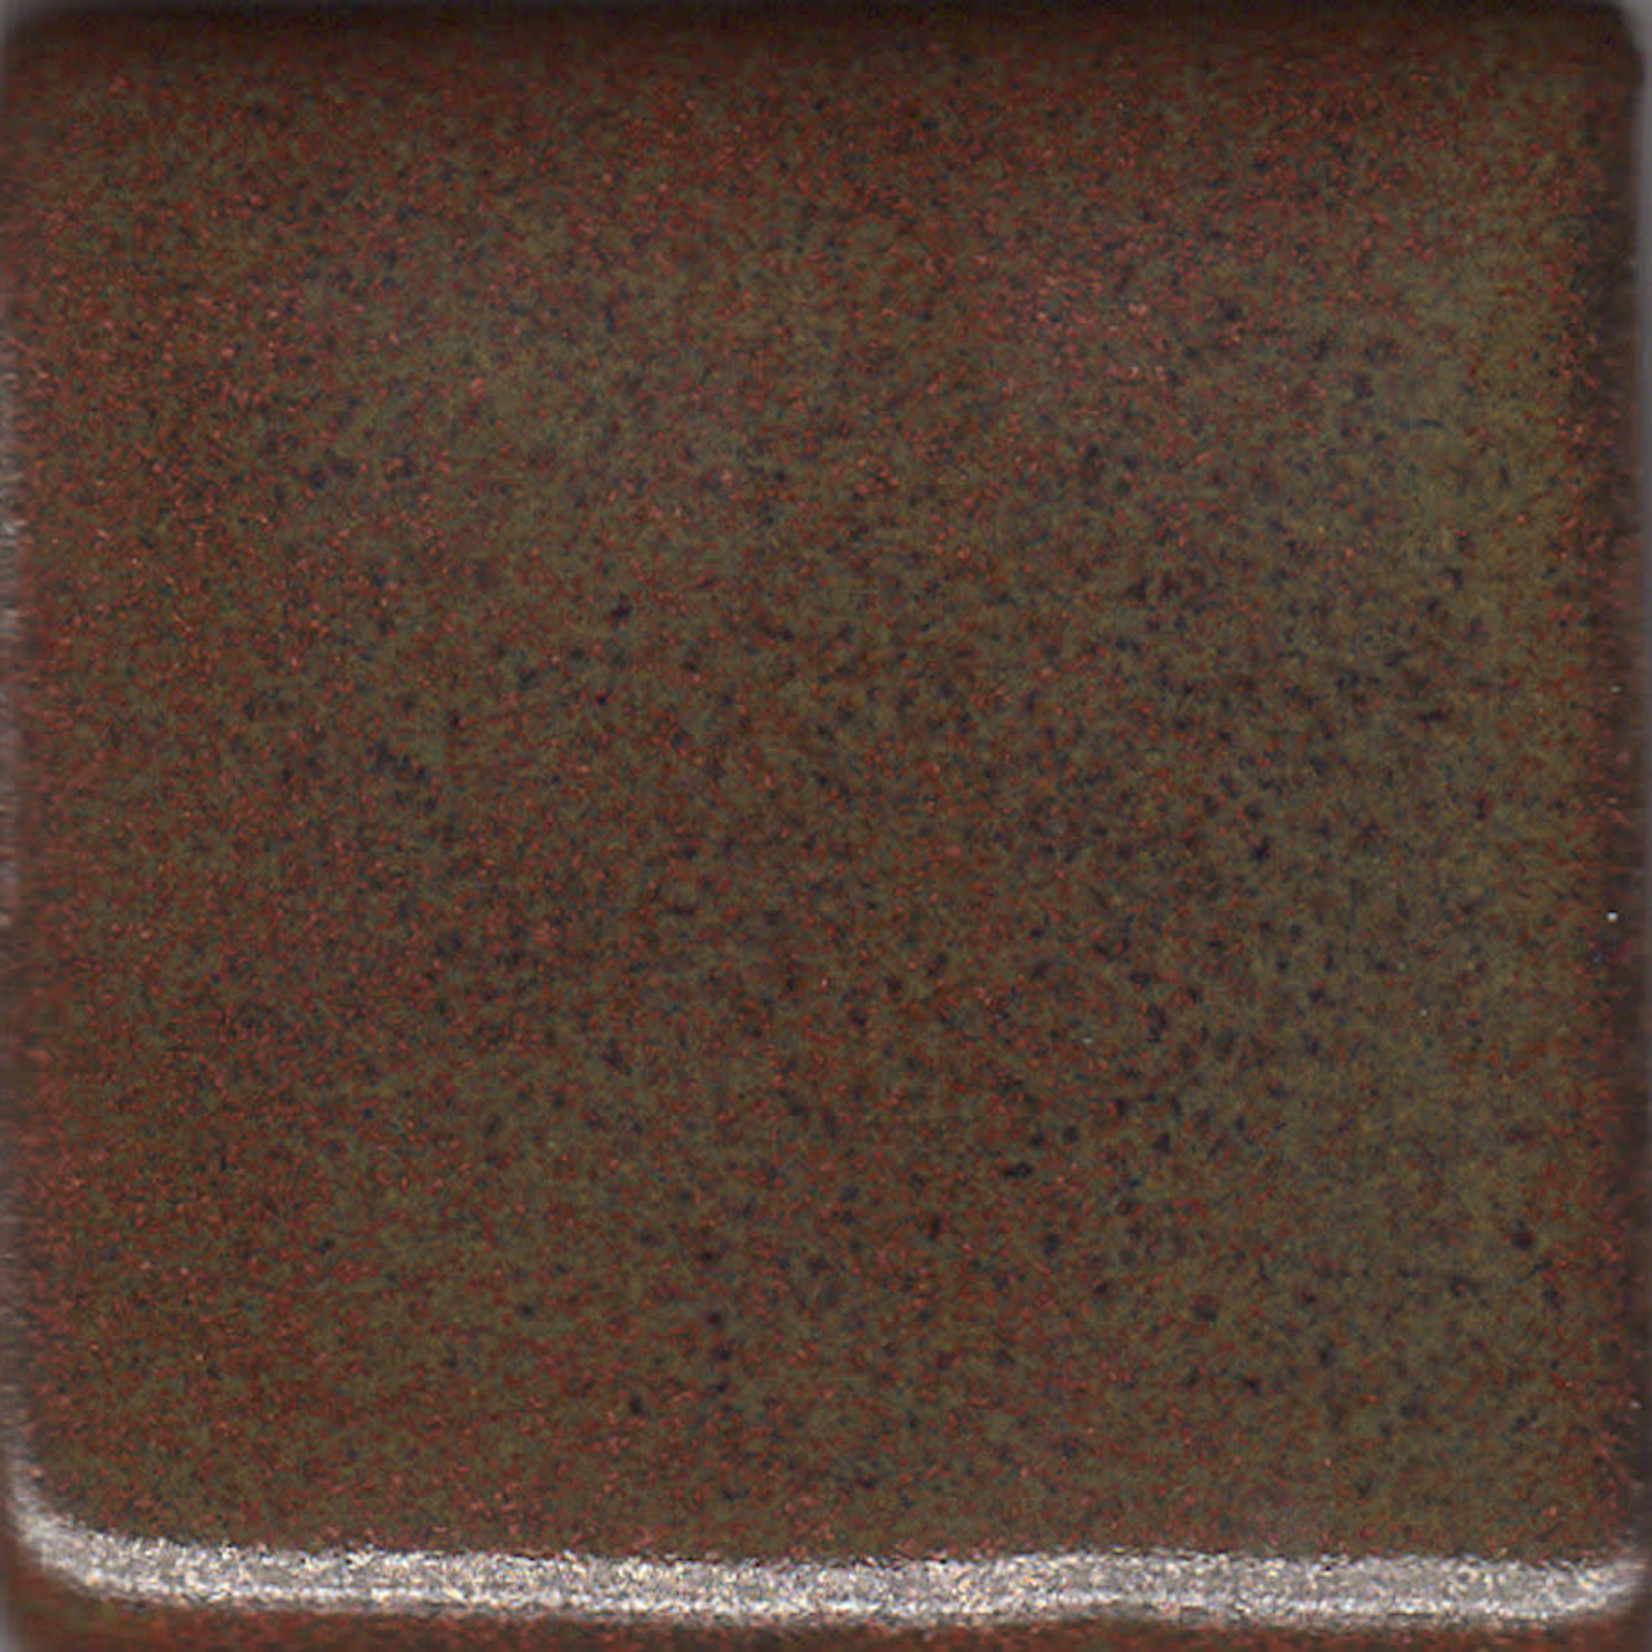 Coyote MBG040 - Saturated Iron ^4-6 Dry Glaze - 5lbs